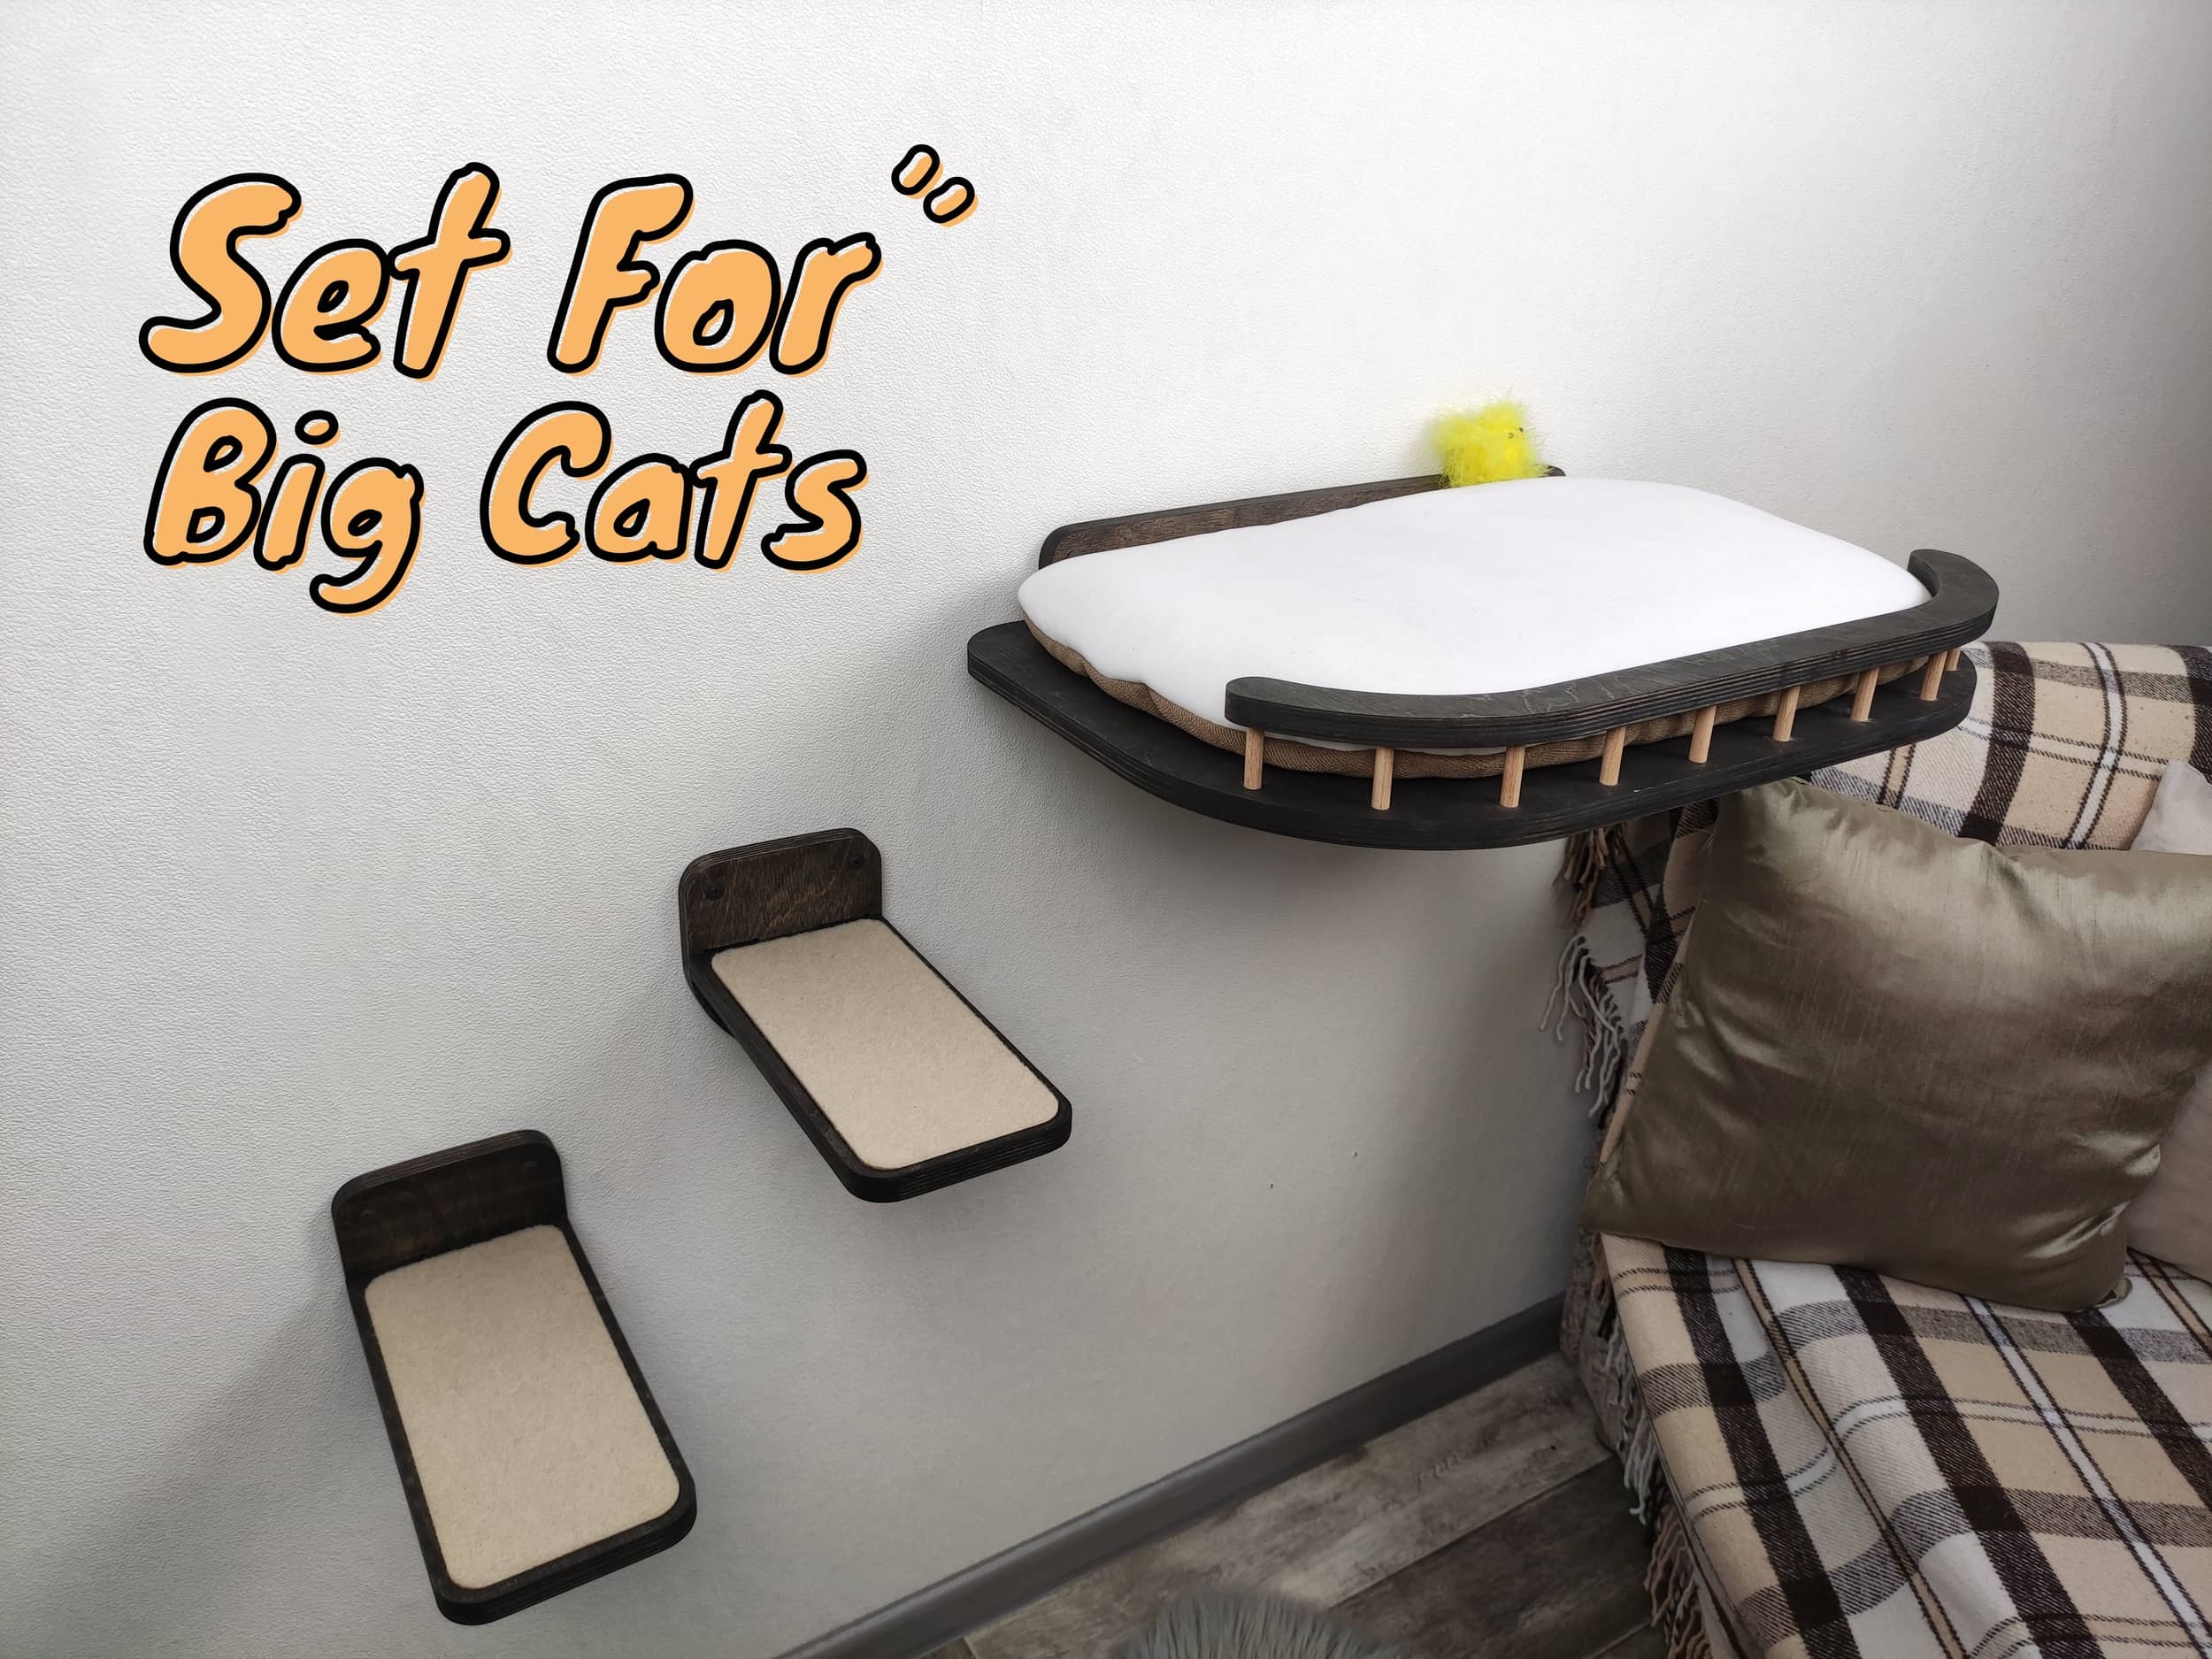 Cat waal shelves for big cats, 2 cat steps and cat wall shelf bed